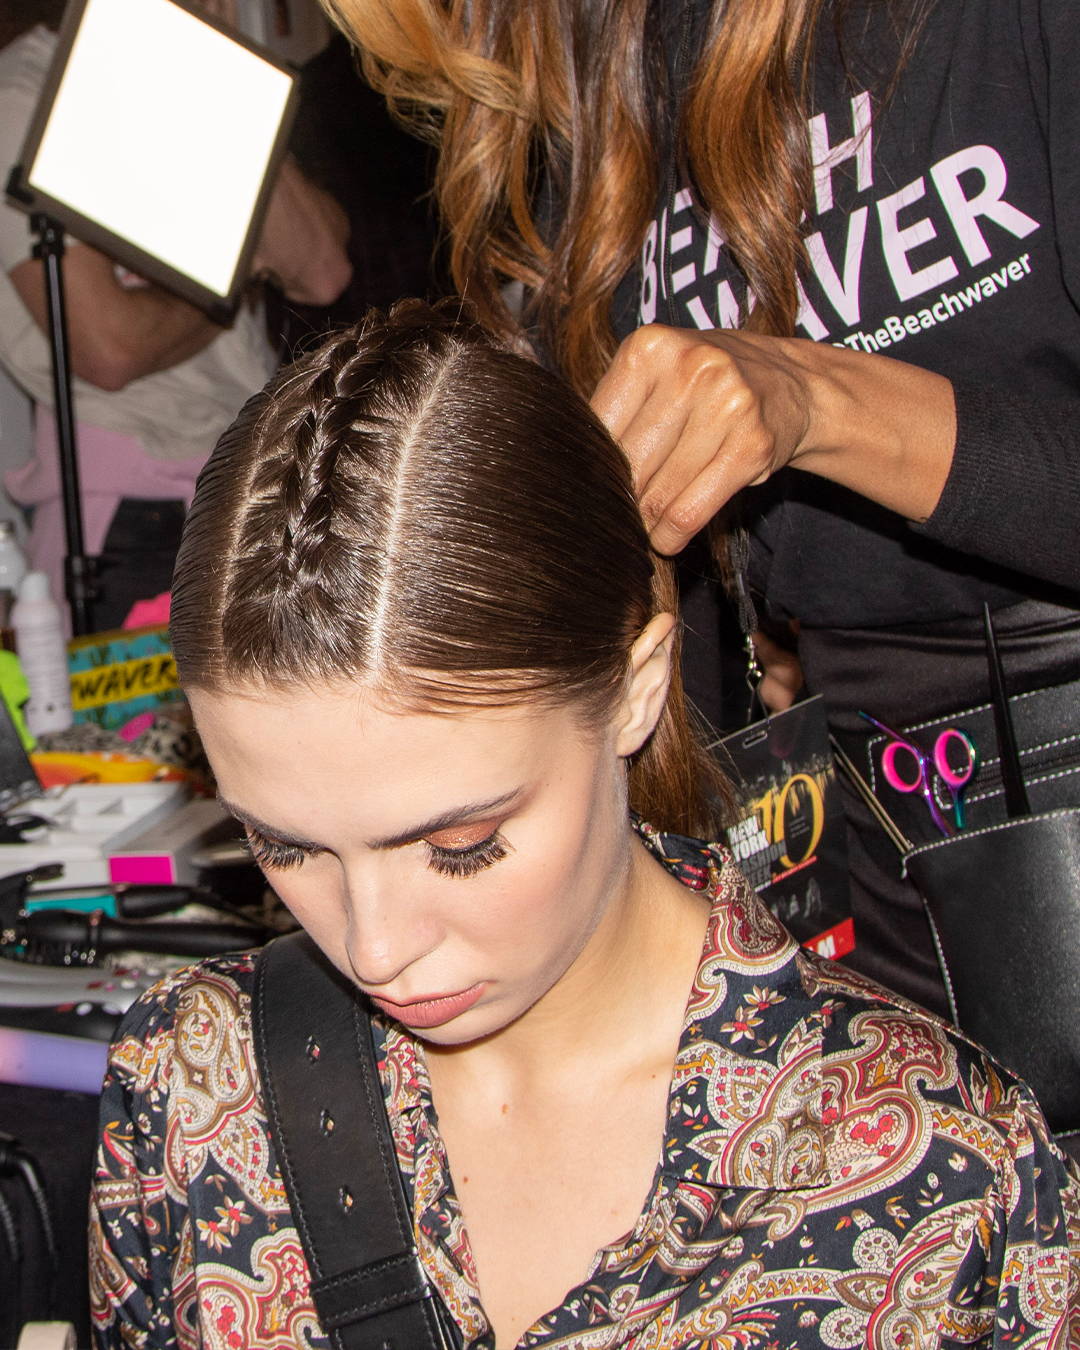 Image of a model getting her hair styles into a sleek braided look backstage at NYFW